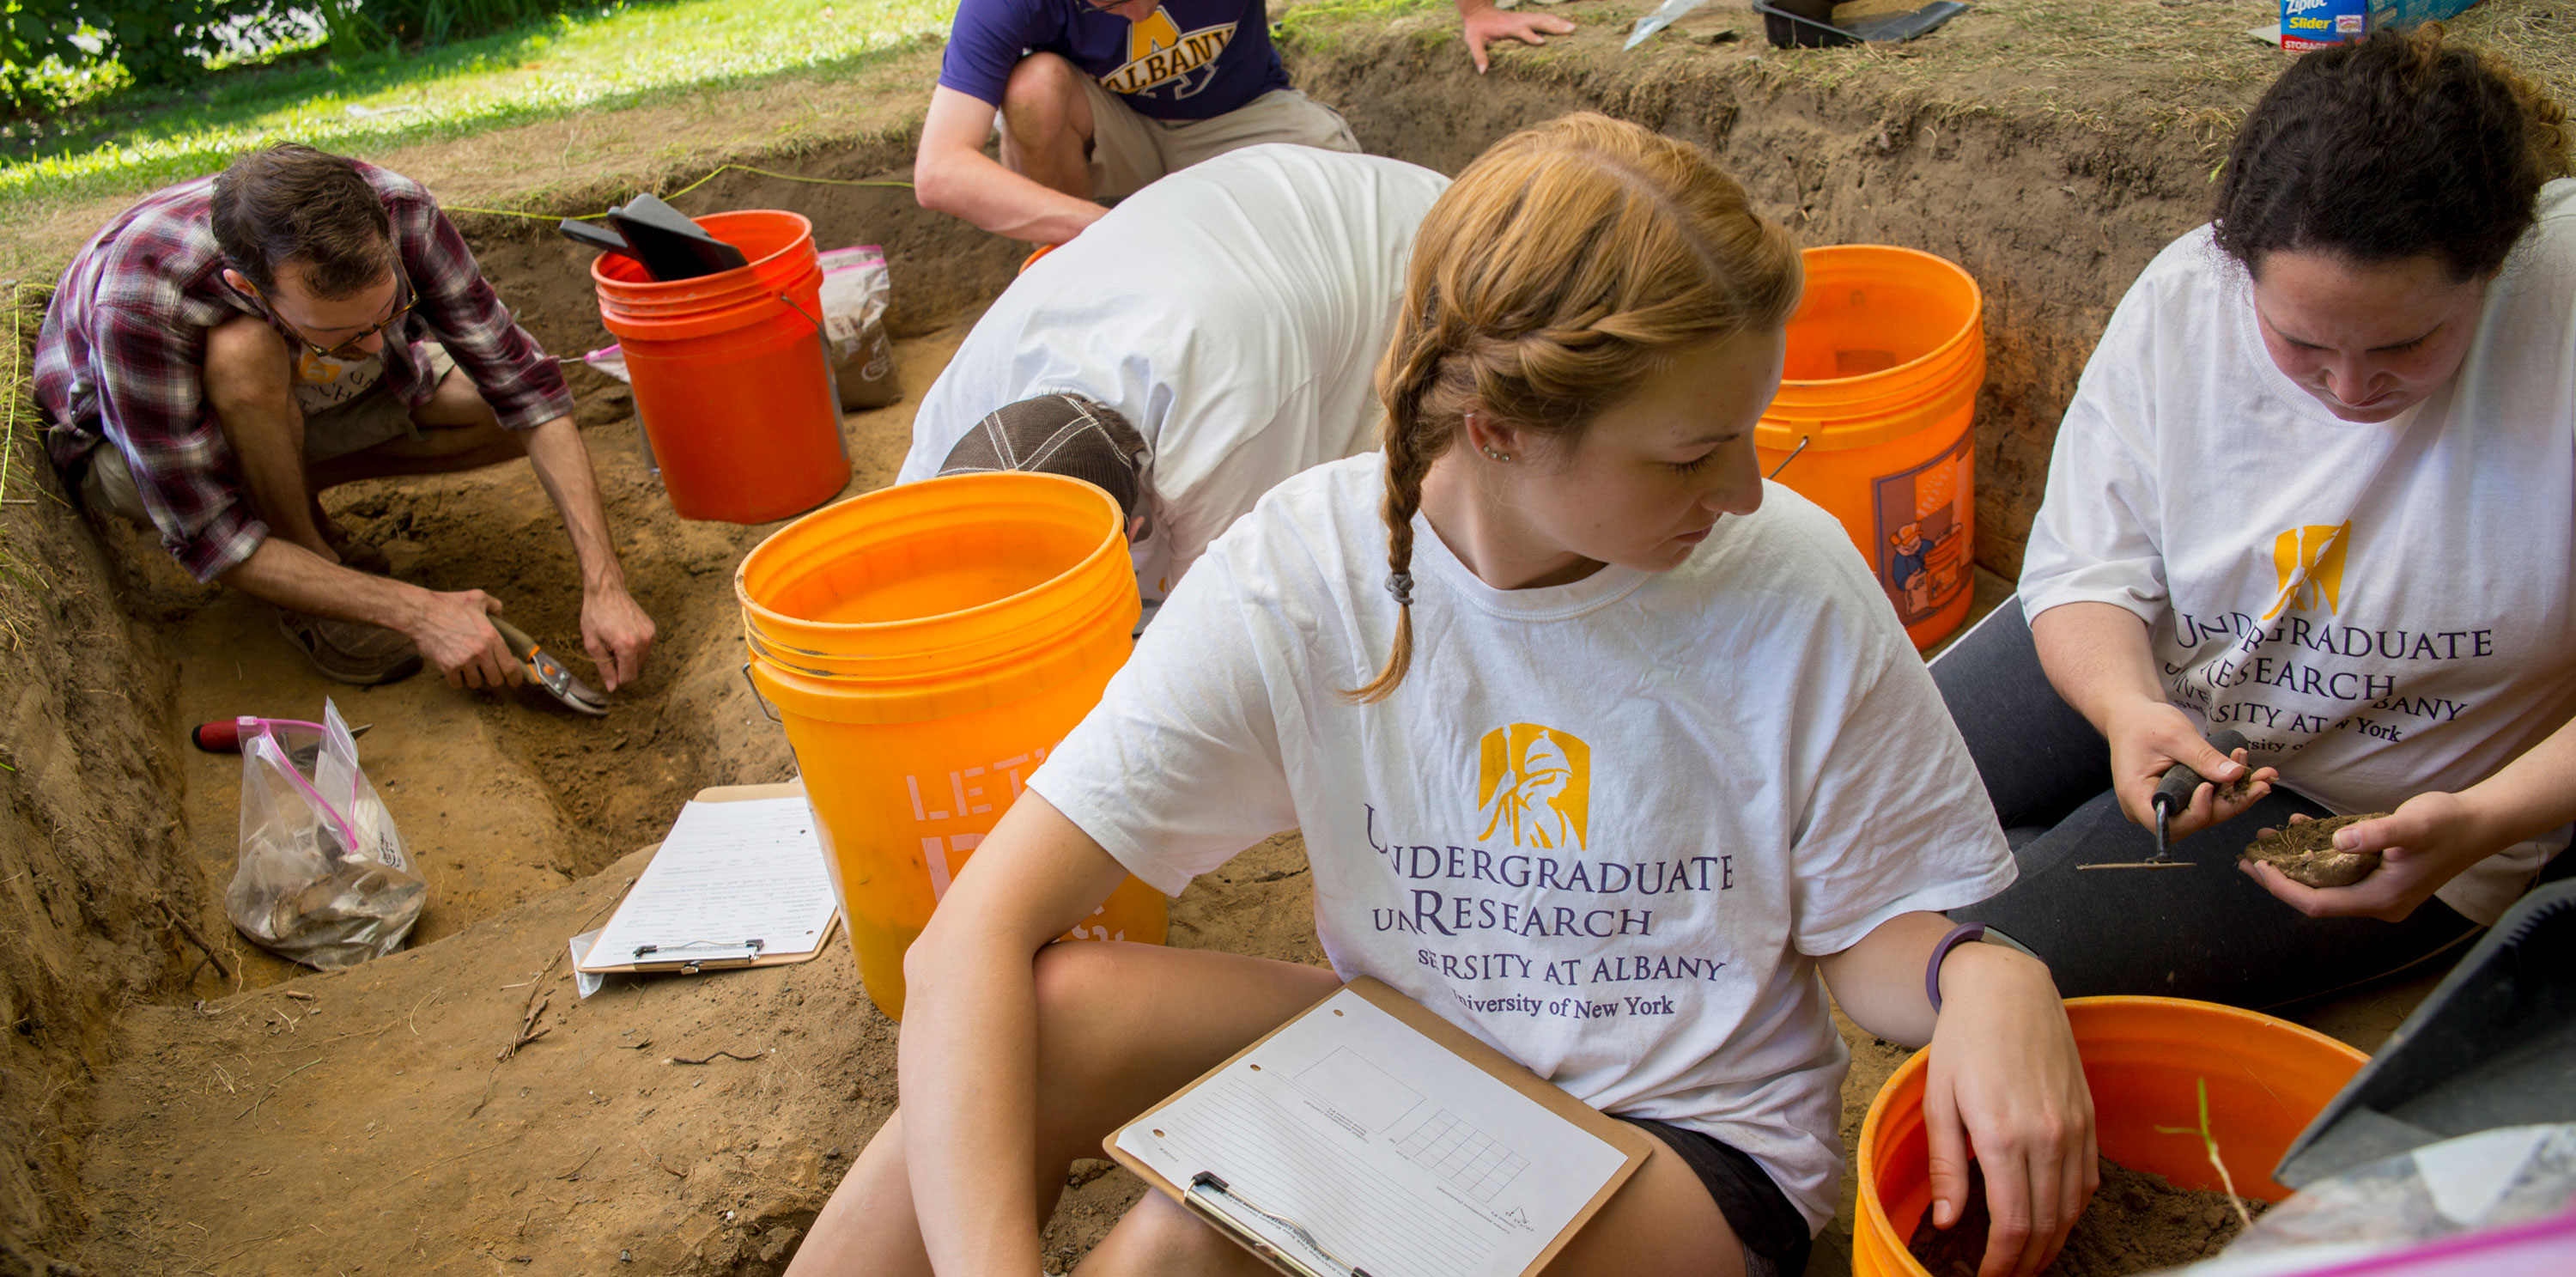 Five students wearing Undergraduate Research t-shirts excavate artifacts at the archaeology dig.